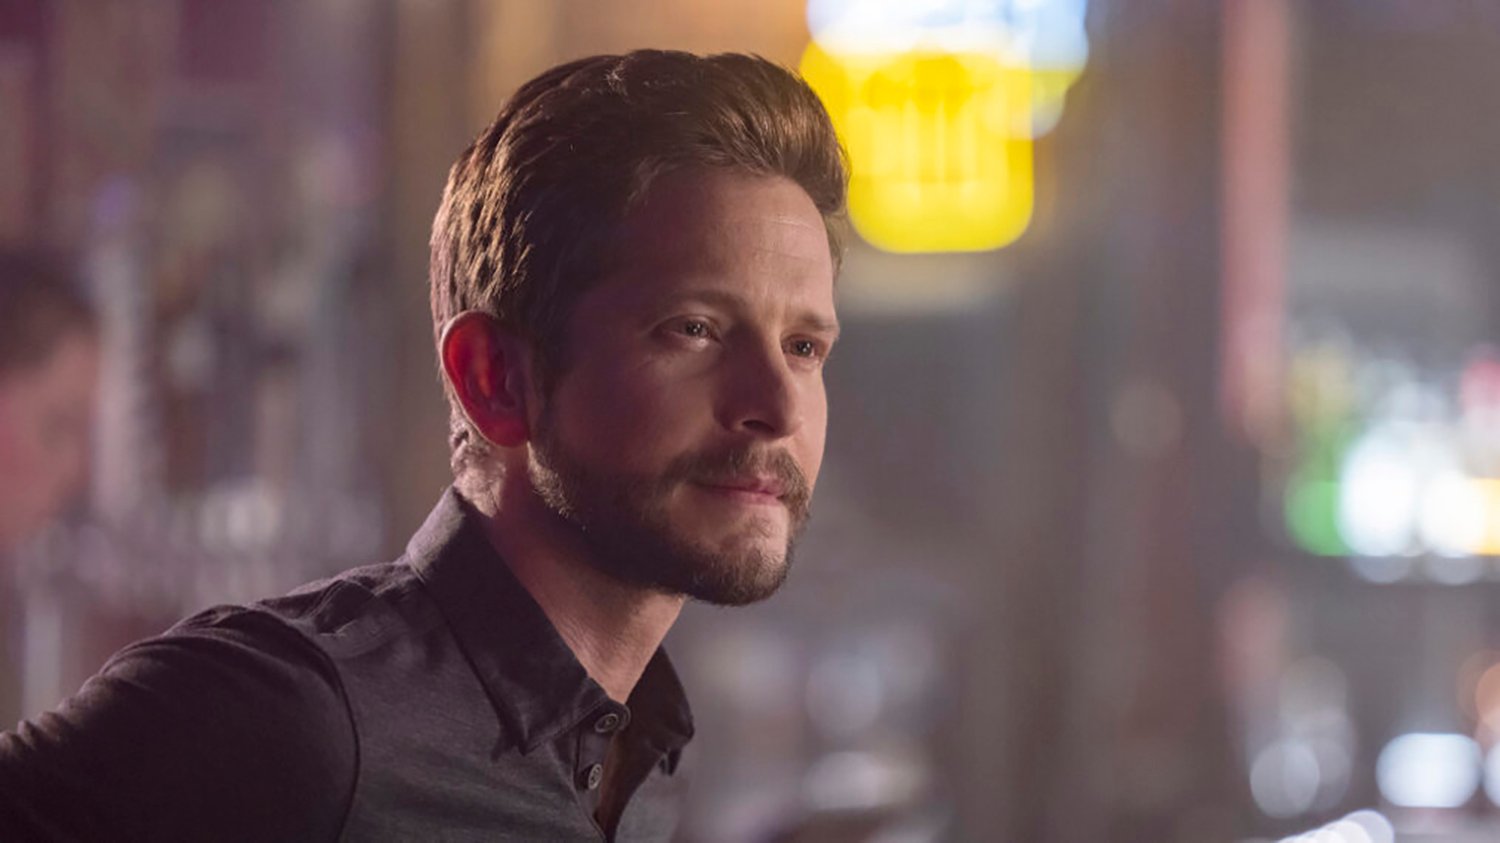 Matt Czuchry as Conrad Hawkins in The Resident, which was renewed for season 6.